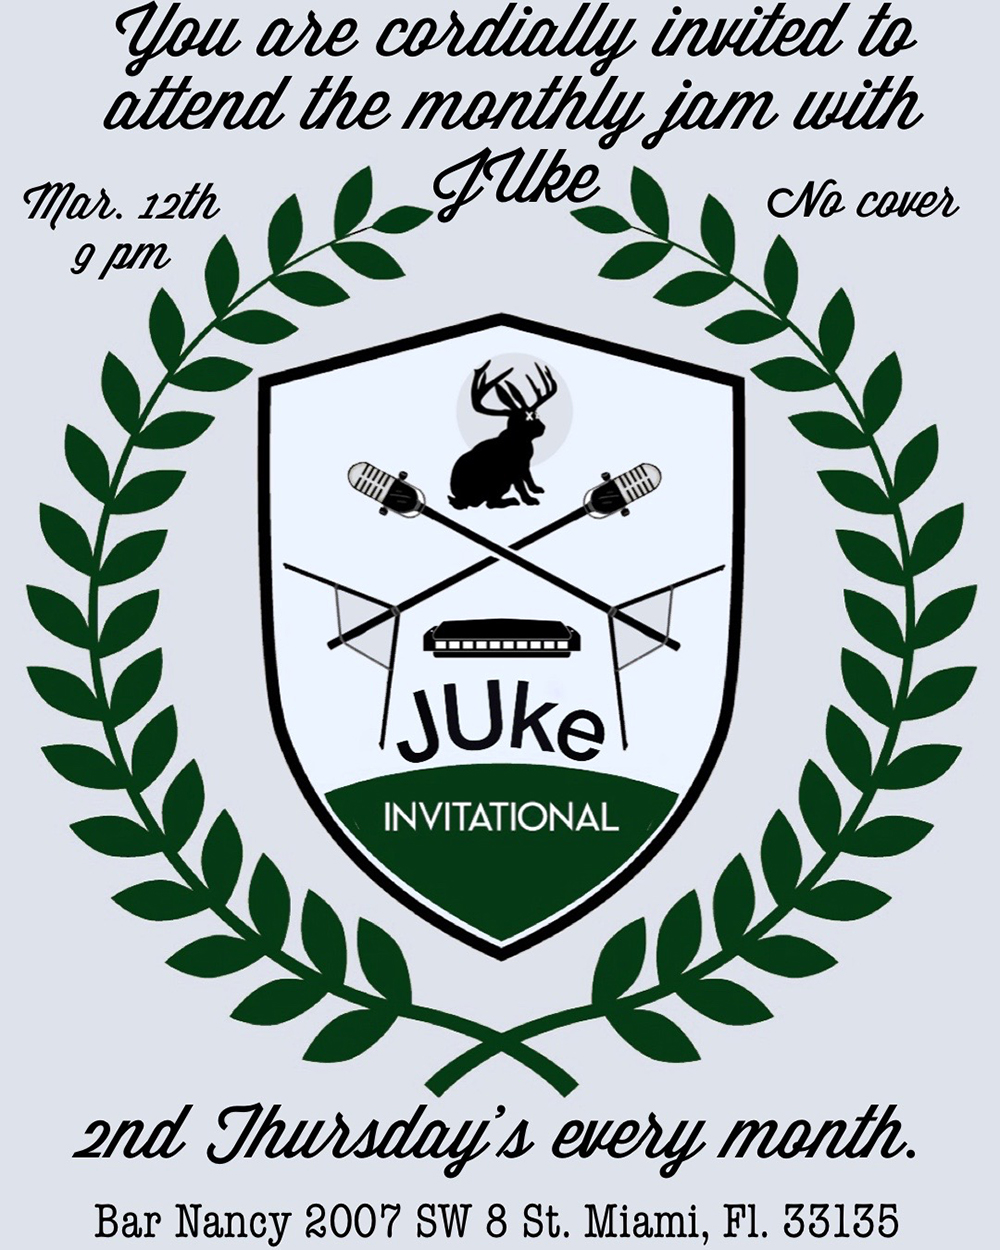 The JUke Invitational! 2nd Thursday’s Every Month!